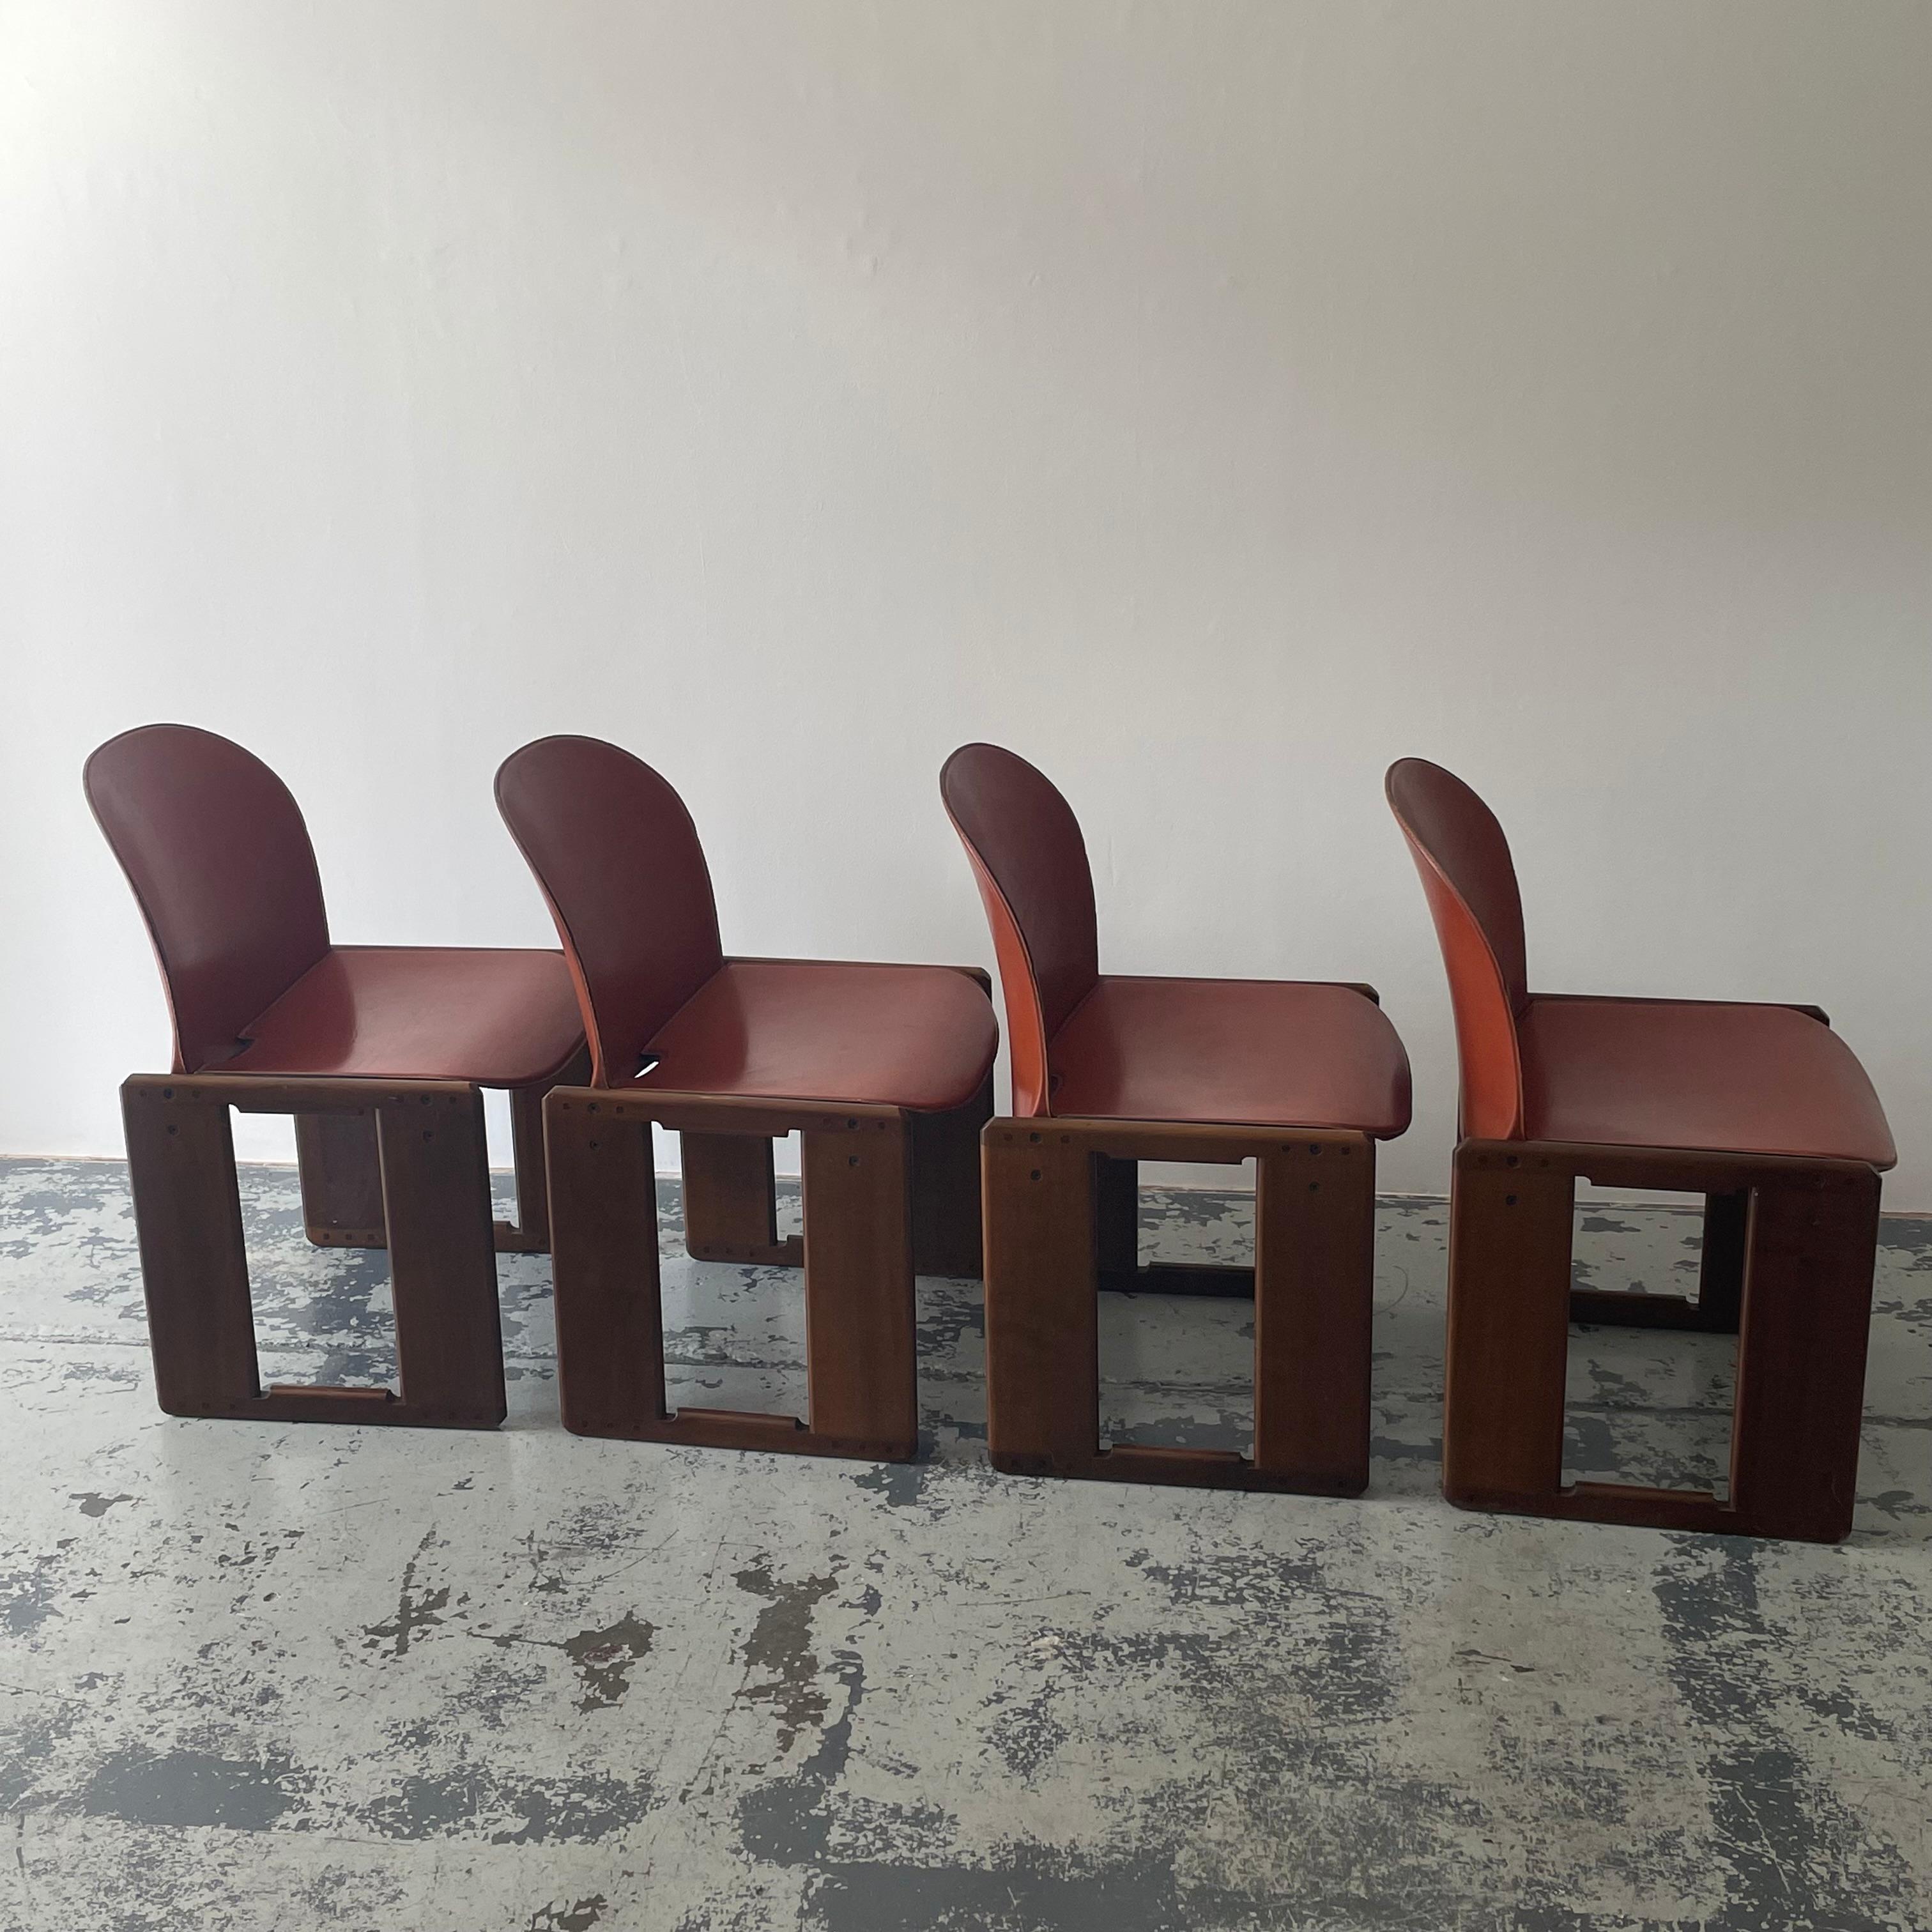 Dialogo Chairs Afra Tobia Scarpa B&B Italia 1970s In Excellent Condition For Sale In London, GB